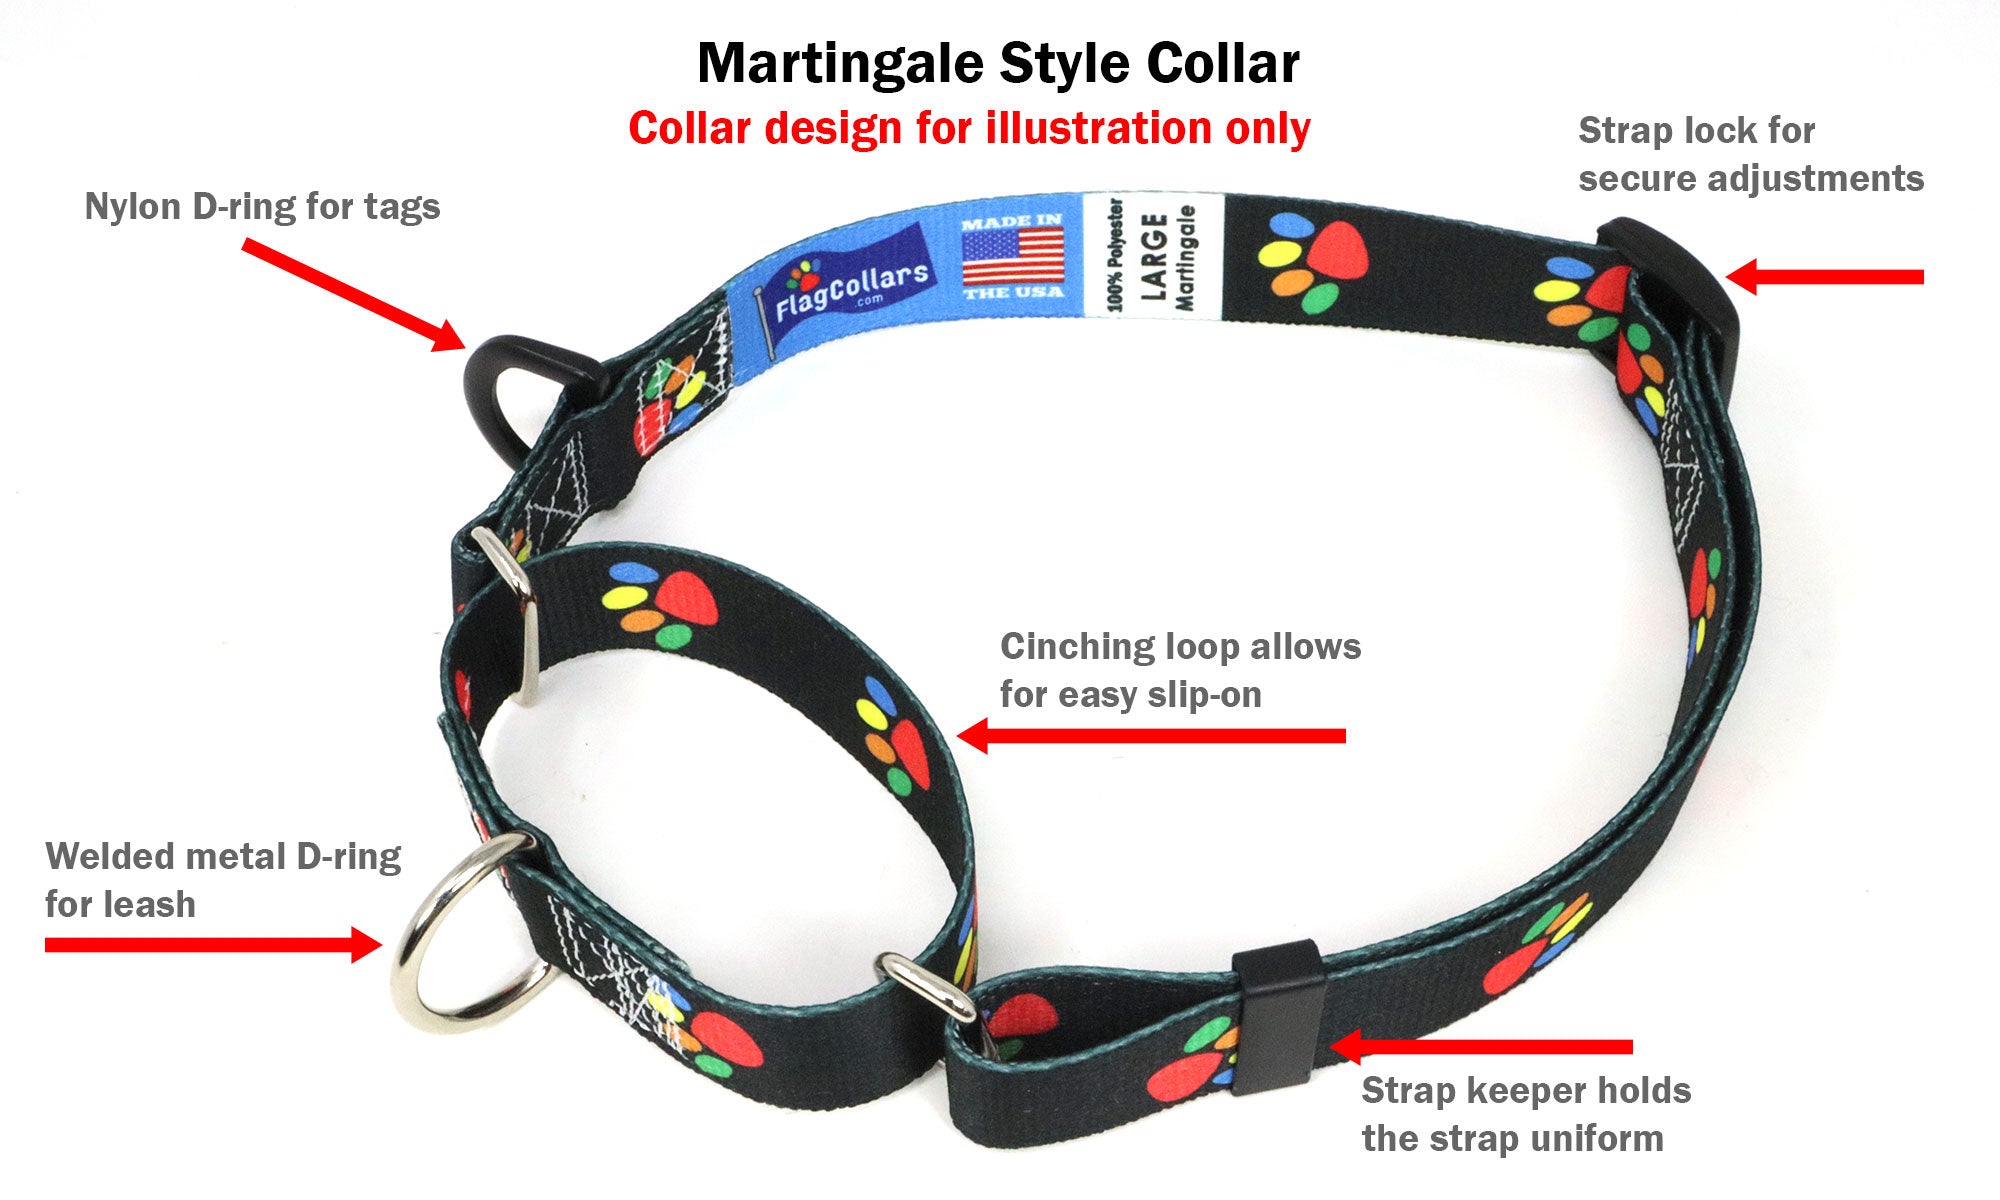 Bulgaria Dog Collar | Quick Release or Martingale Style | Made in NJ, USA